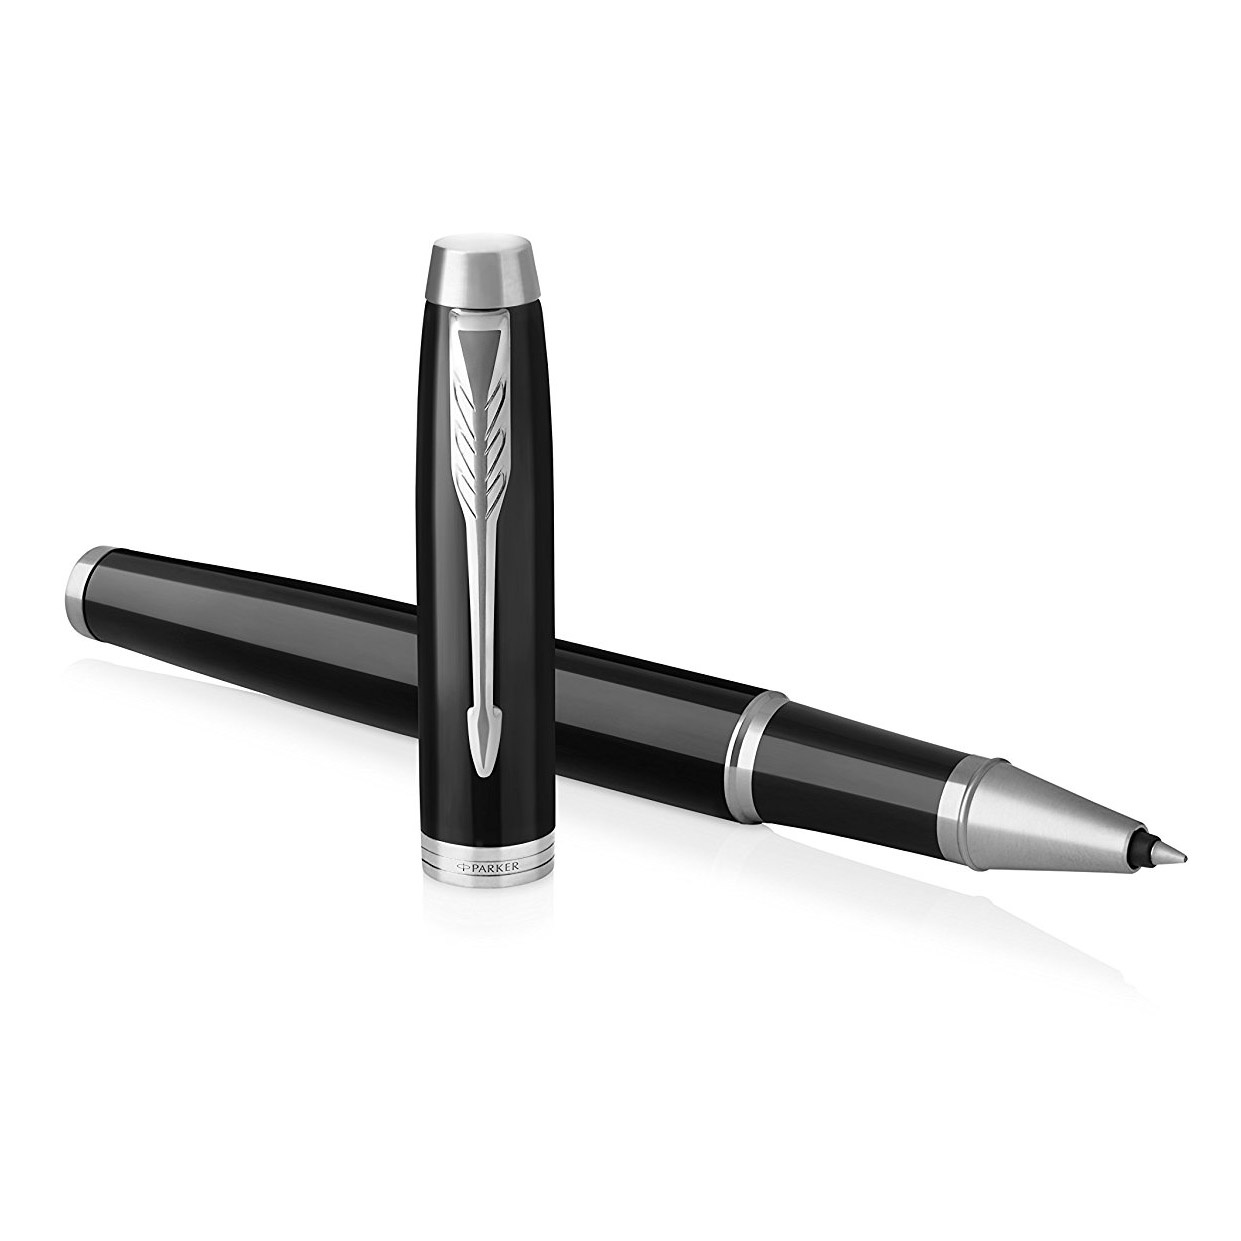 IM Black/Chrome Rollerball in the group Pens / Fine Writing / Rollerball Pens at Pen Store (104668)